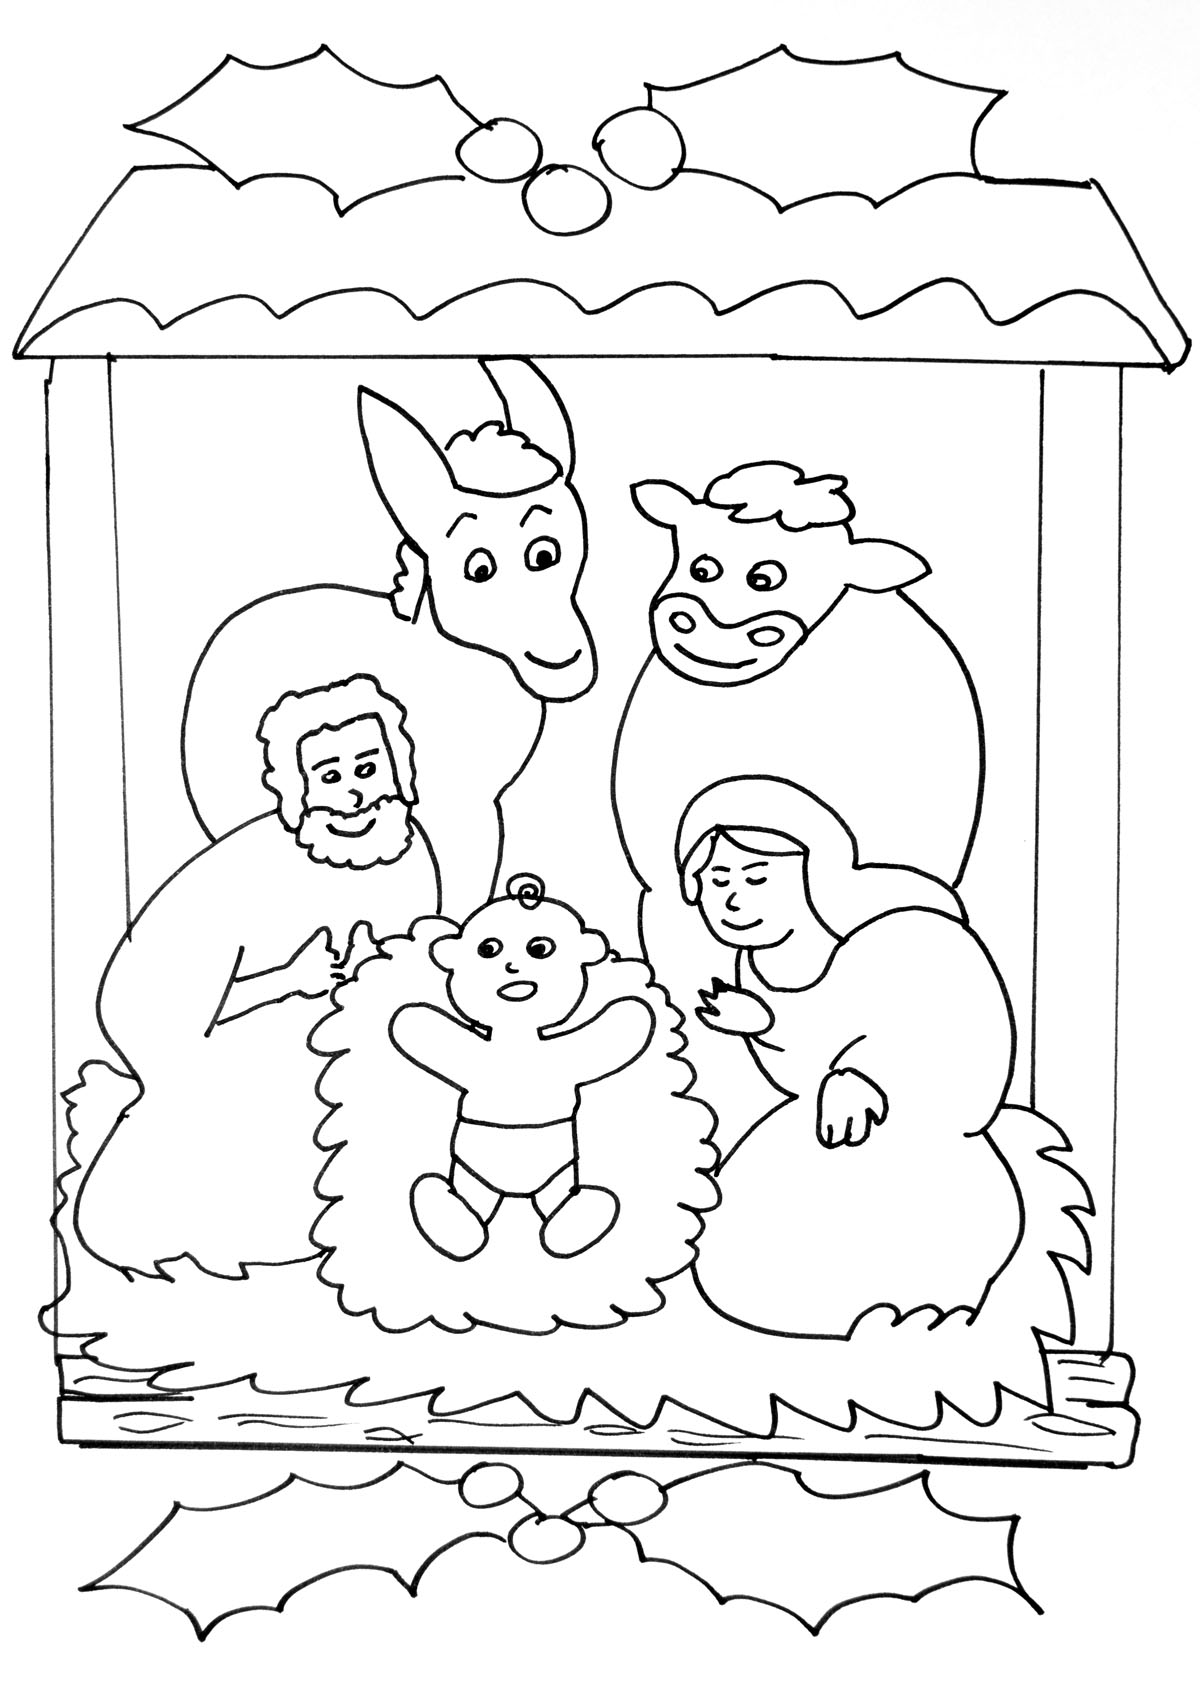 Nativity scene image to print and color